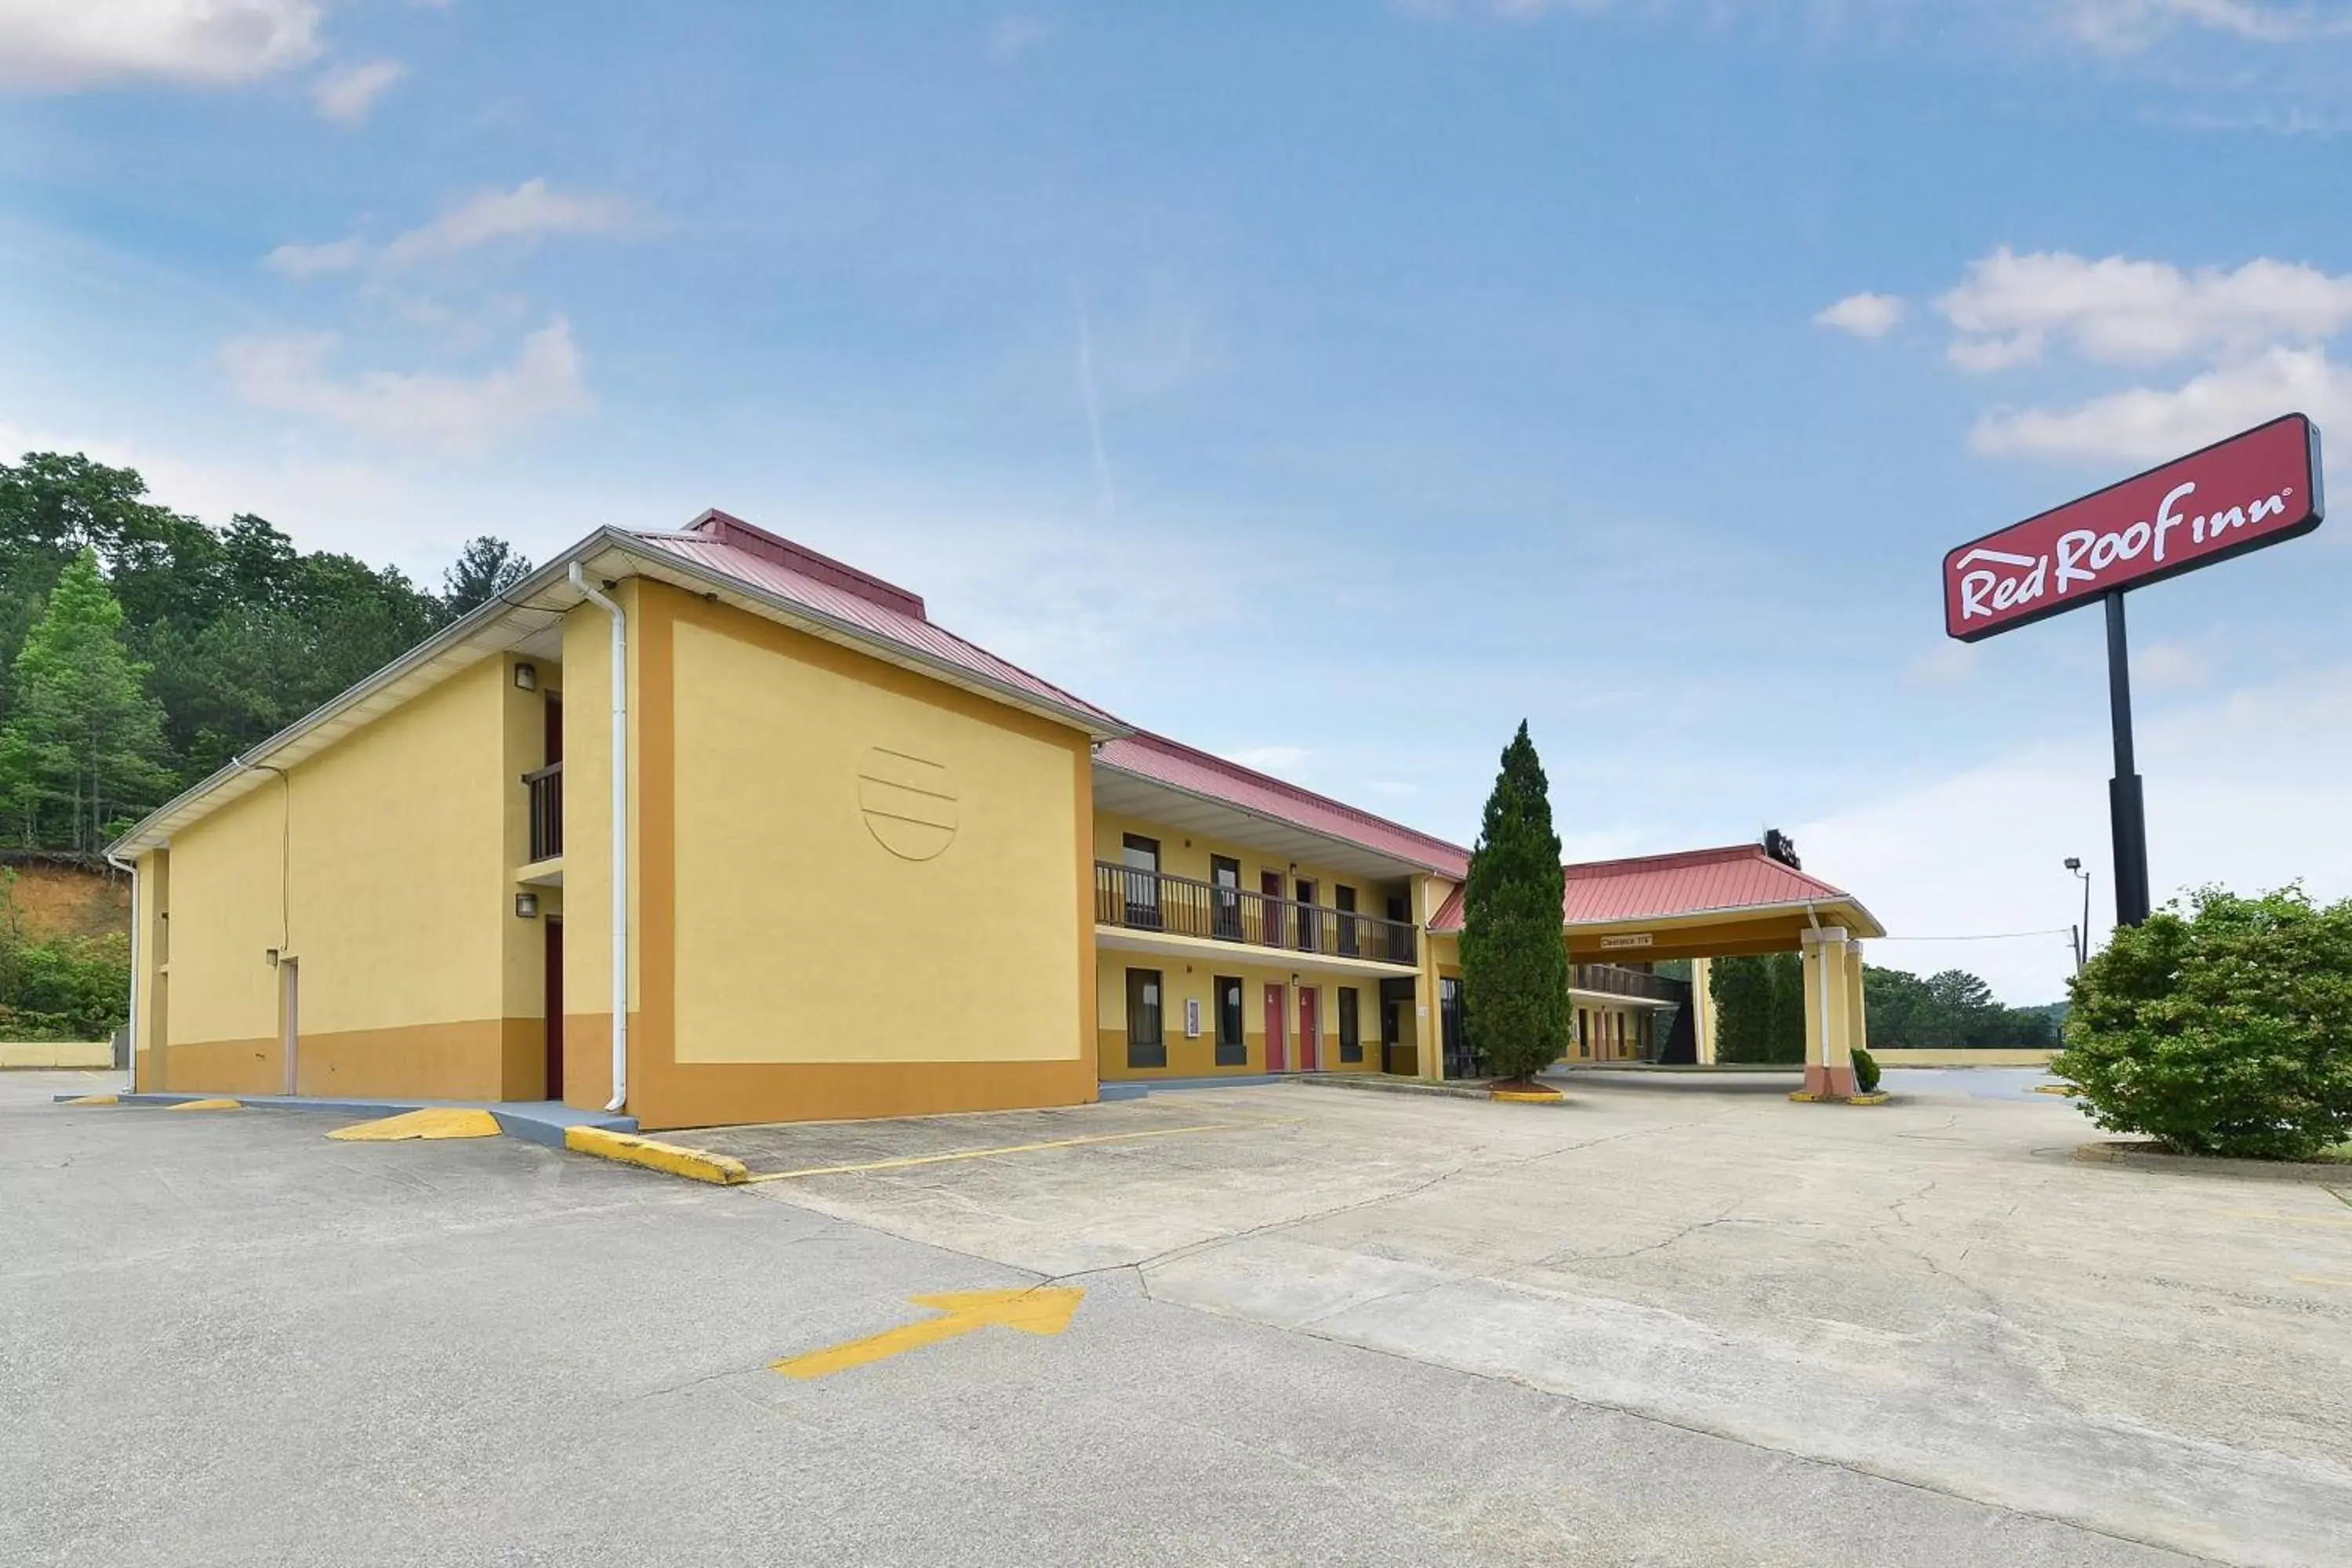 Property building, Facade/Entrance in Red Roof Inn Cartersville-Emerson-LakePoint North